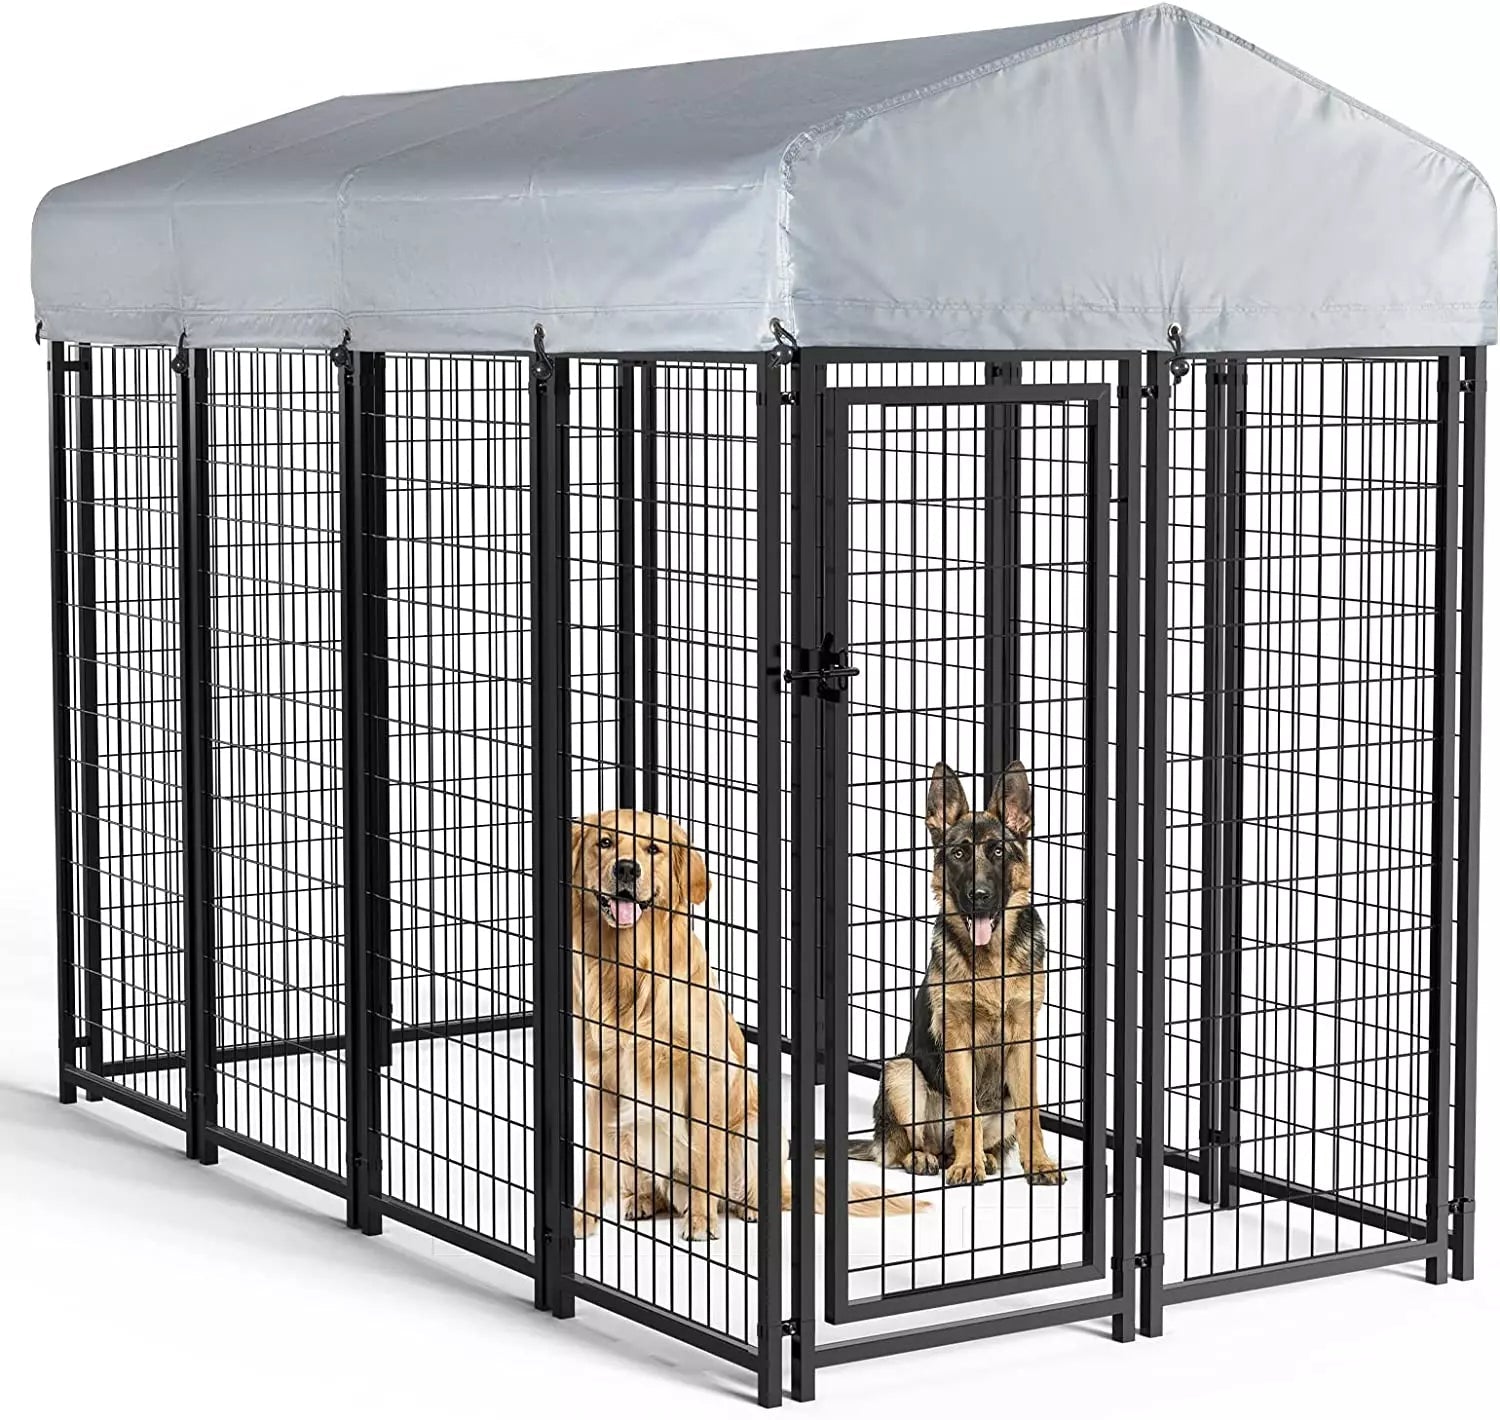 Vitesse 8x4x6 FT Outdoor Large Dog Kennel PLB02